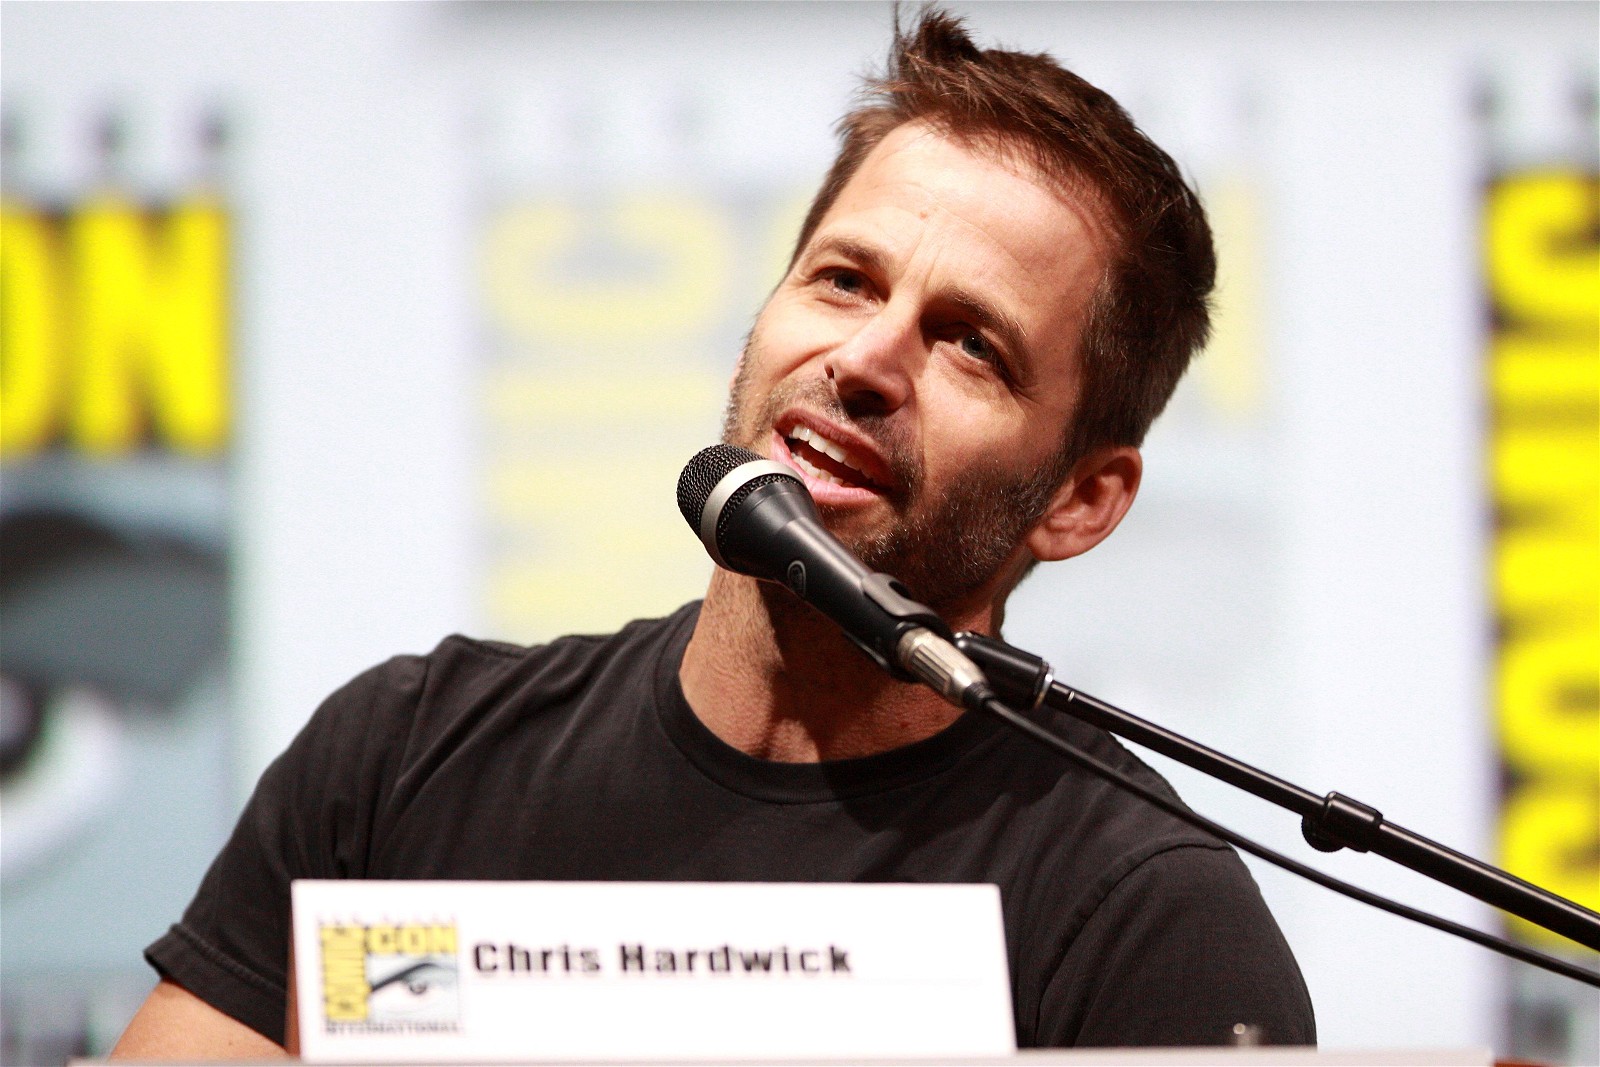 Zack Snyder speaking to the aduience at the 2013 San Diego Comic Con International